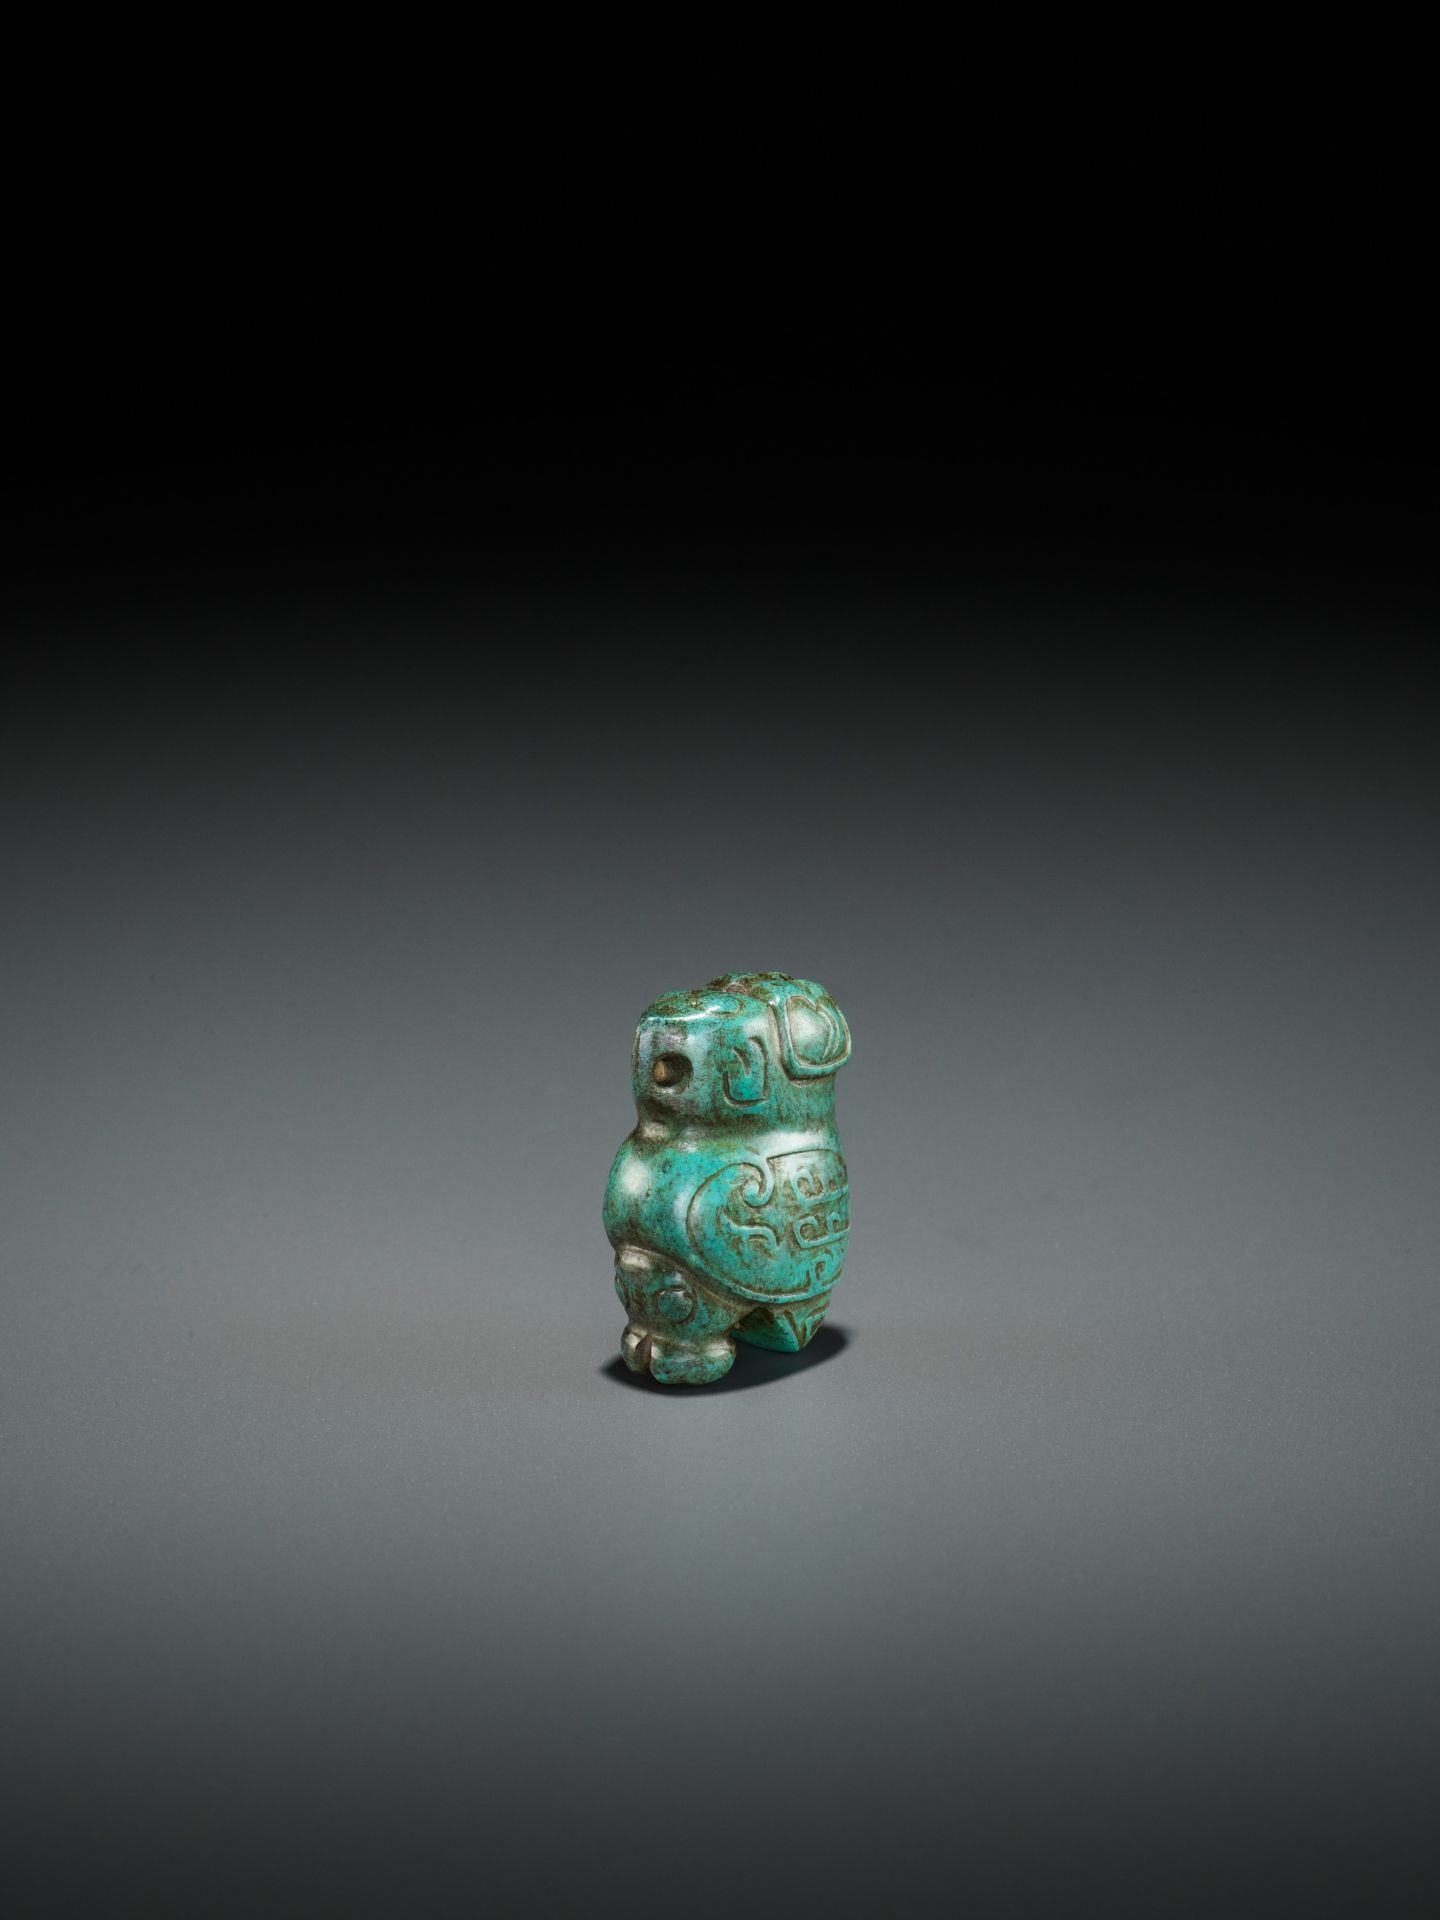 A TURQUOISE MATRIX PENDANT DEPICTING AN OWL, LATE SHANG DYNASTY - Image 2 of 13